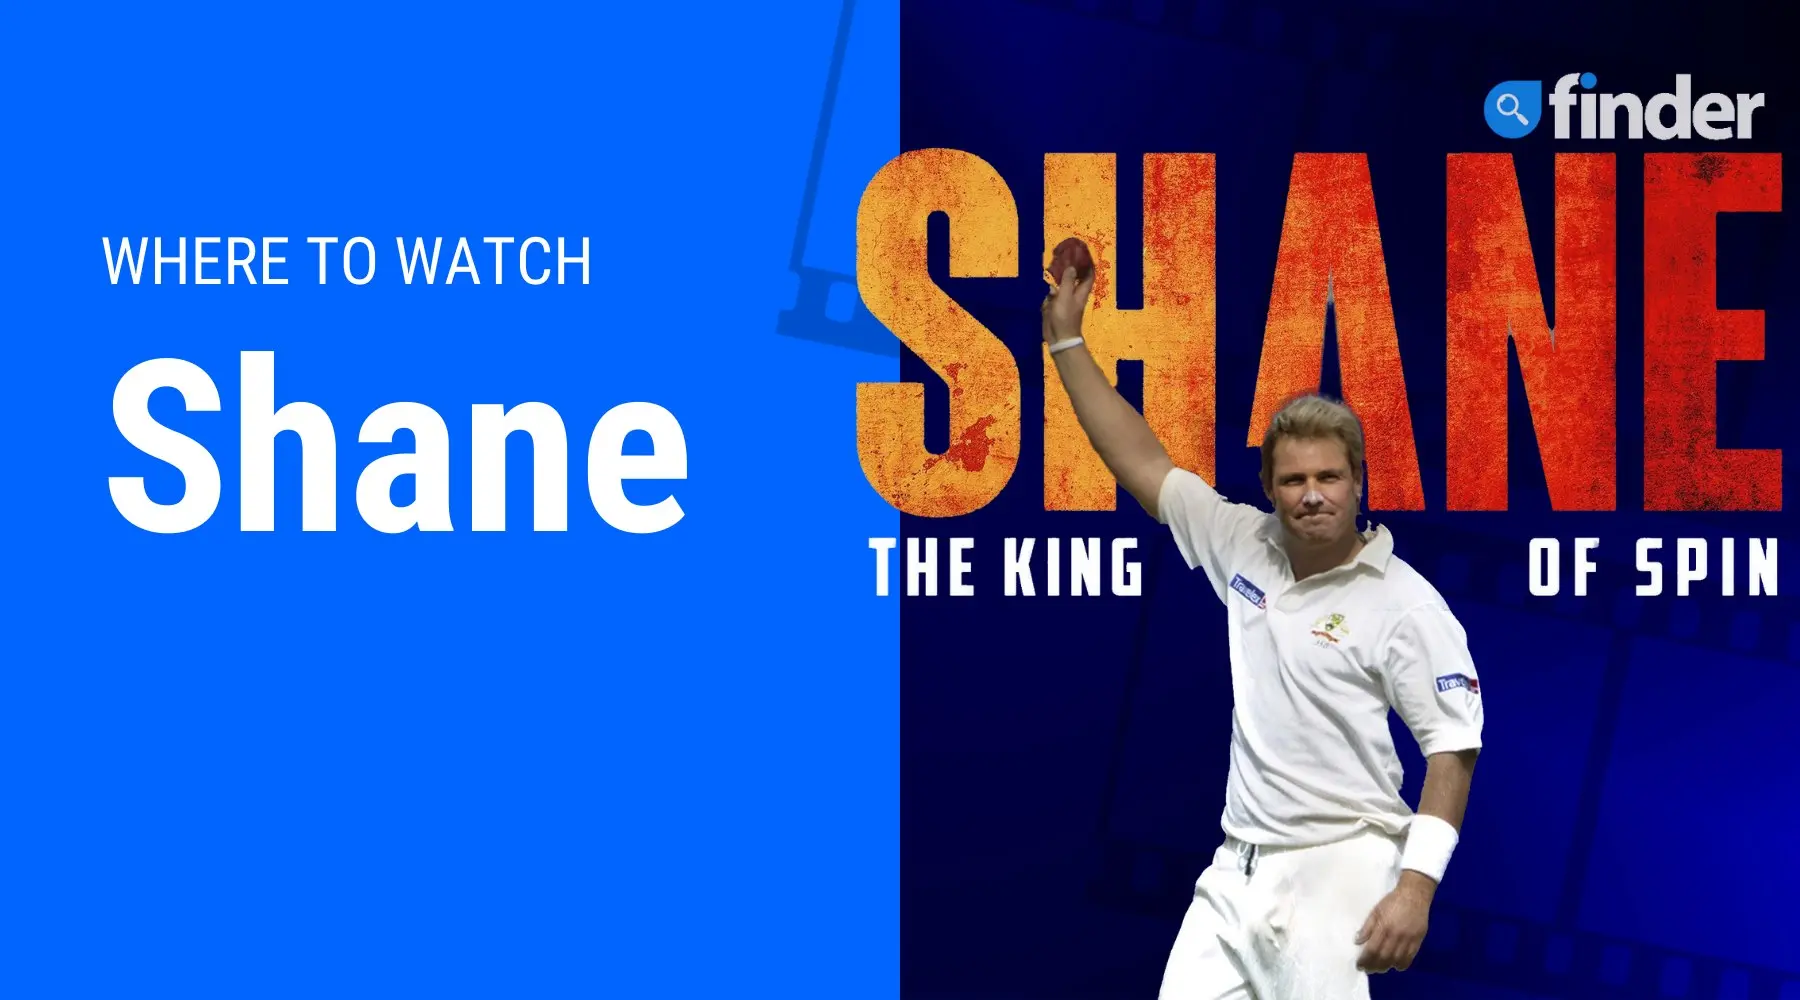 Where to watch new Shane Warne documentary online for free